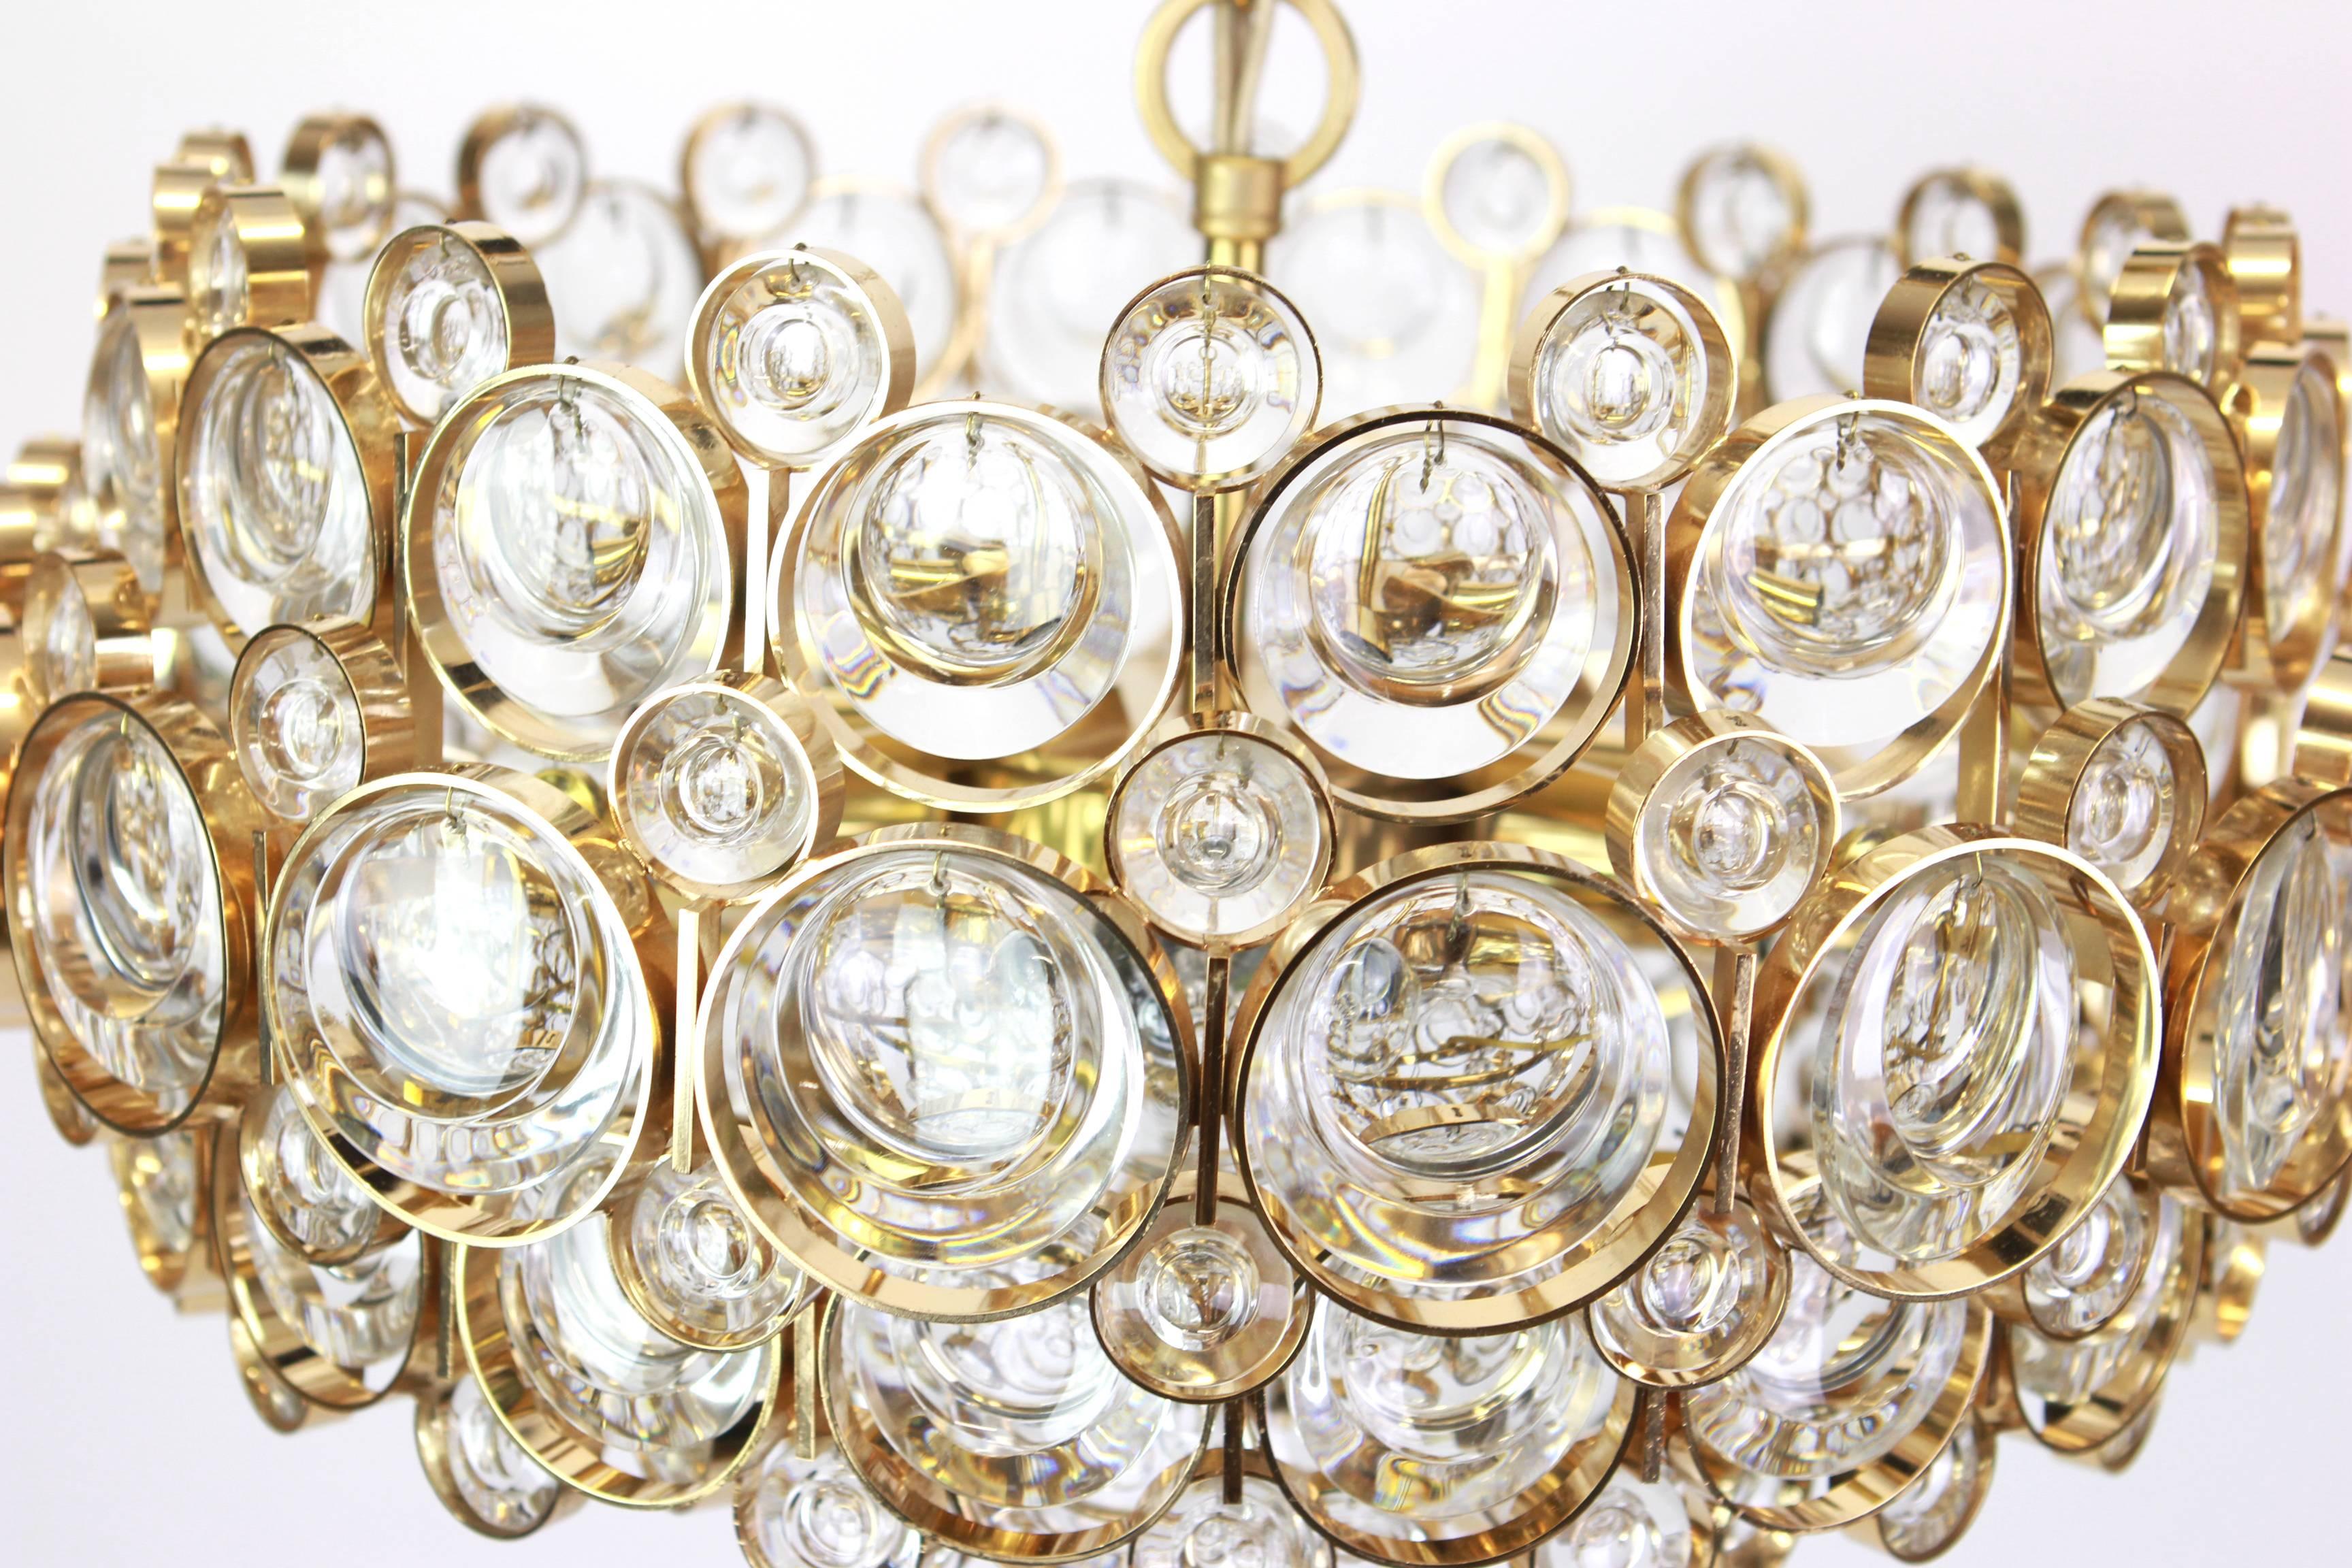 Late 20th Century Gilt Brass and Crystal Chandelier, Sciolari Design by Palwa, Germany, 1970s